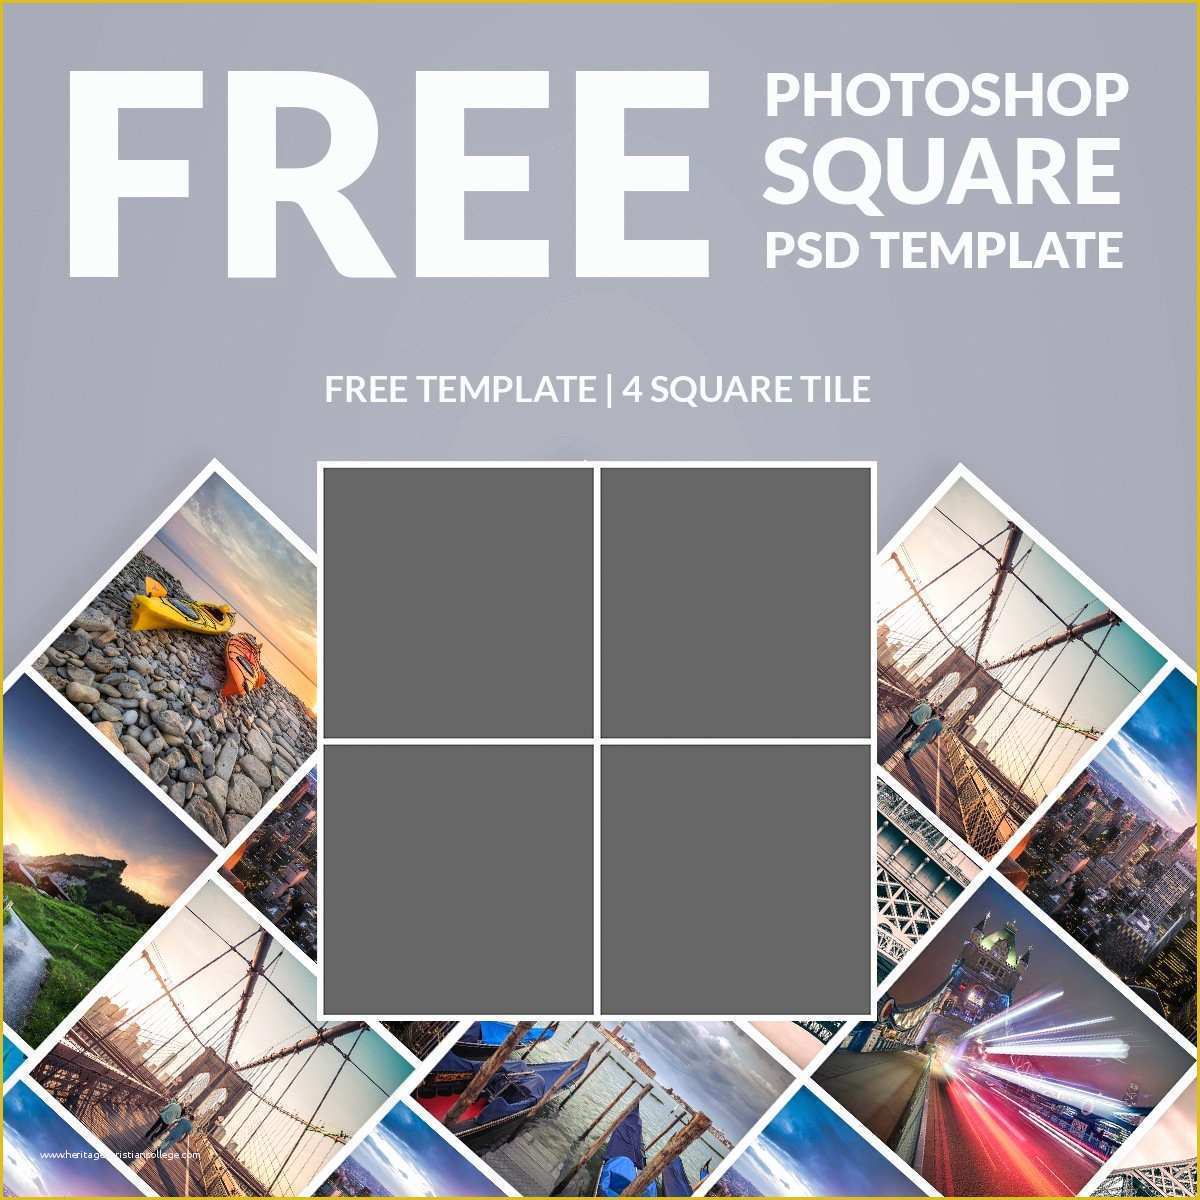 Free Picture Collage Template Of Free Shop Template Collage Square Download now